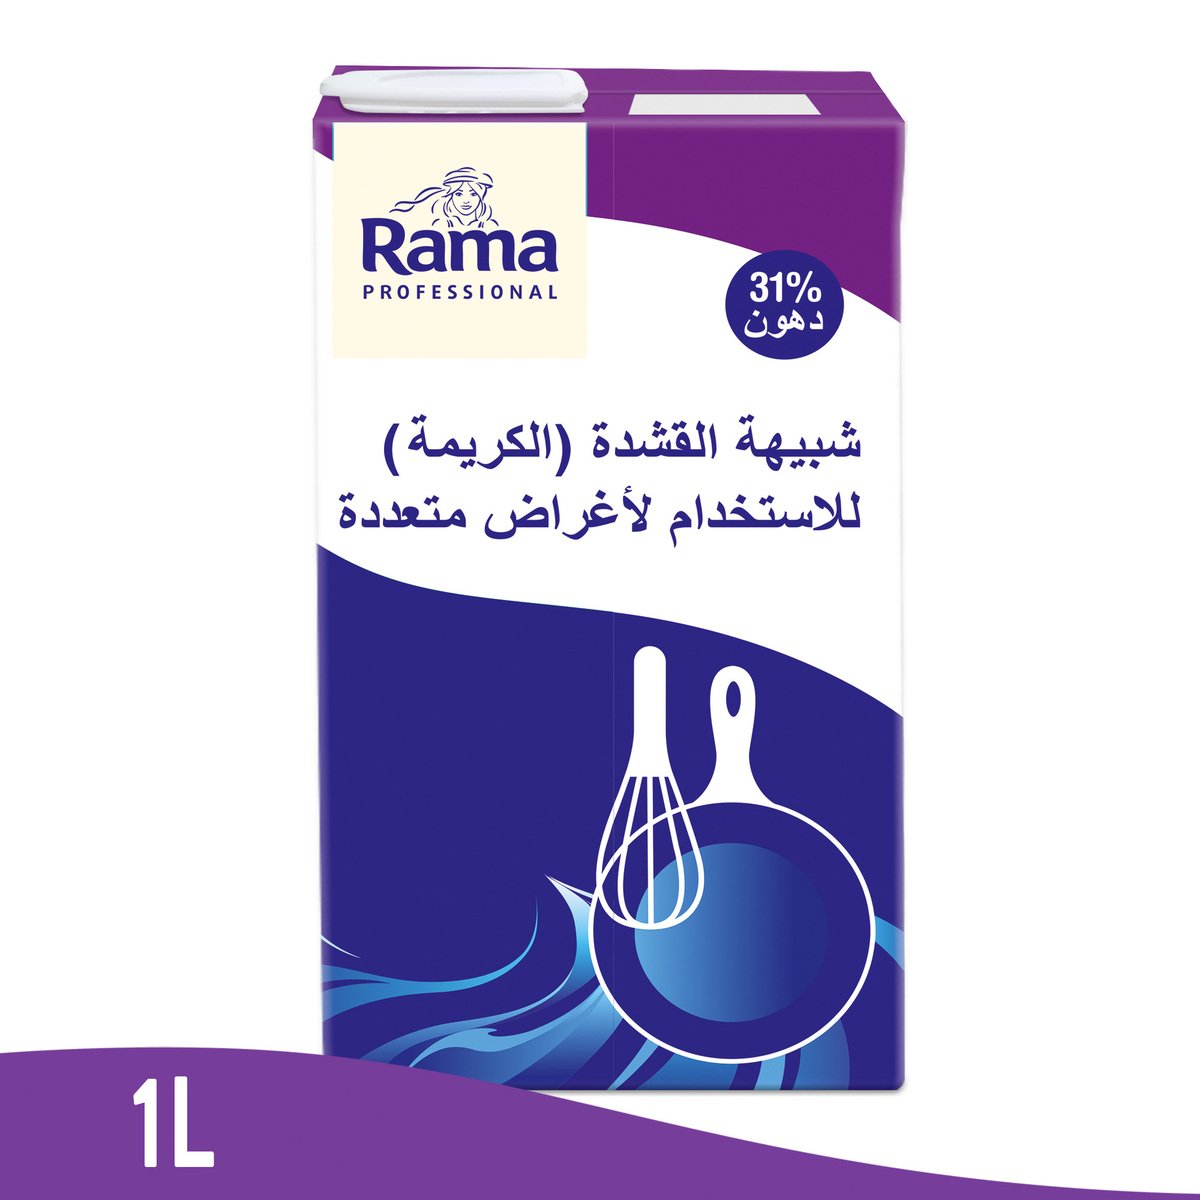 Rama Multipurpose Cooking & Whipping Cream 1 Litre